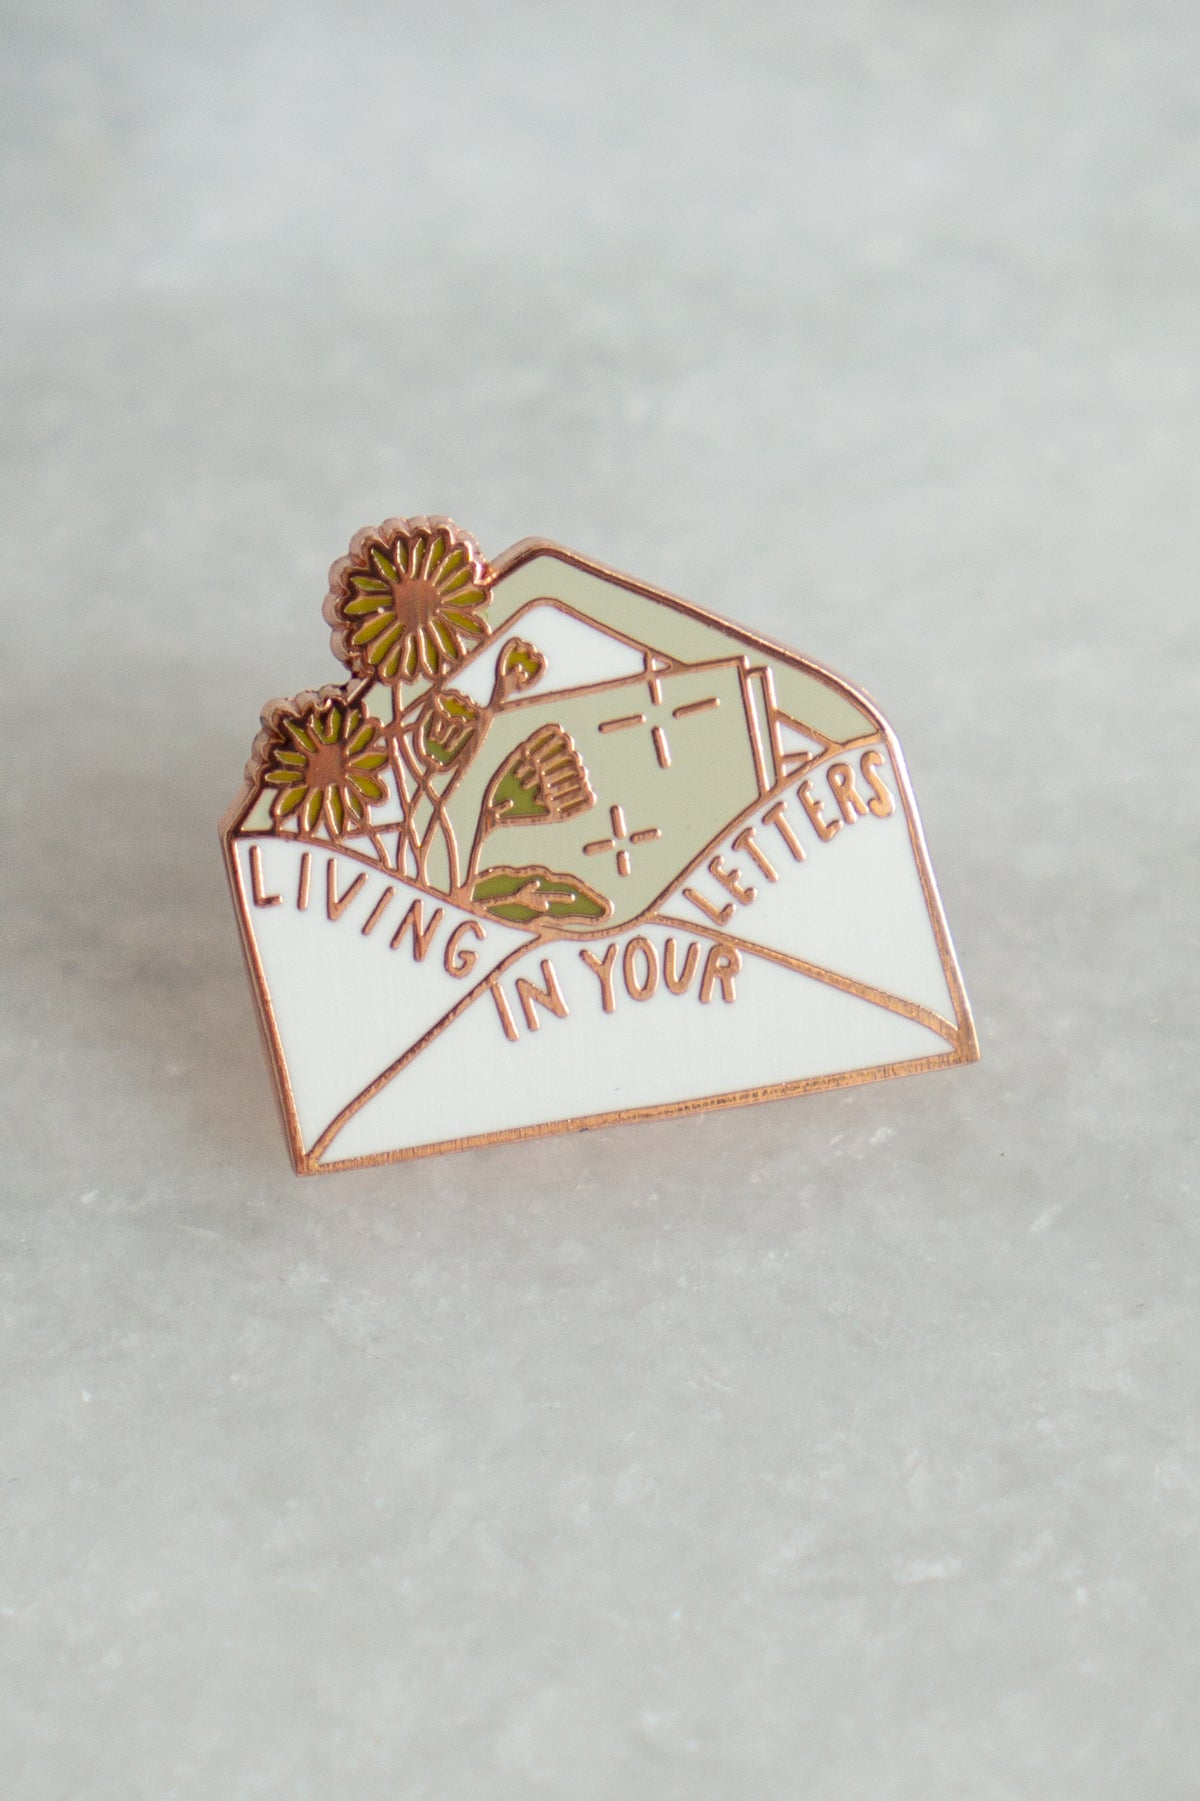 Living in your Letters Pin